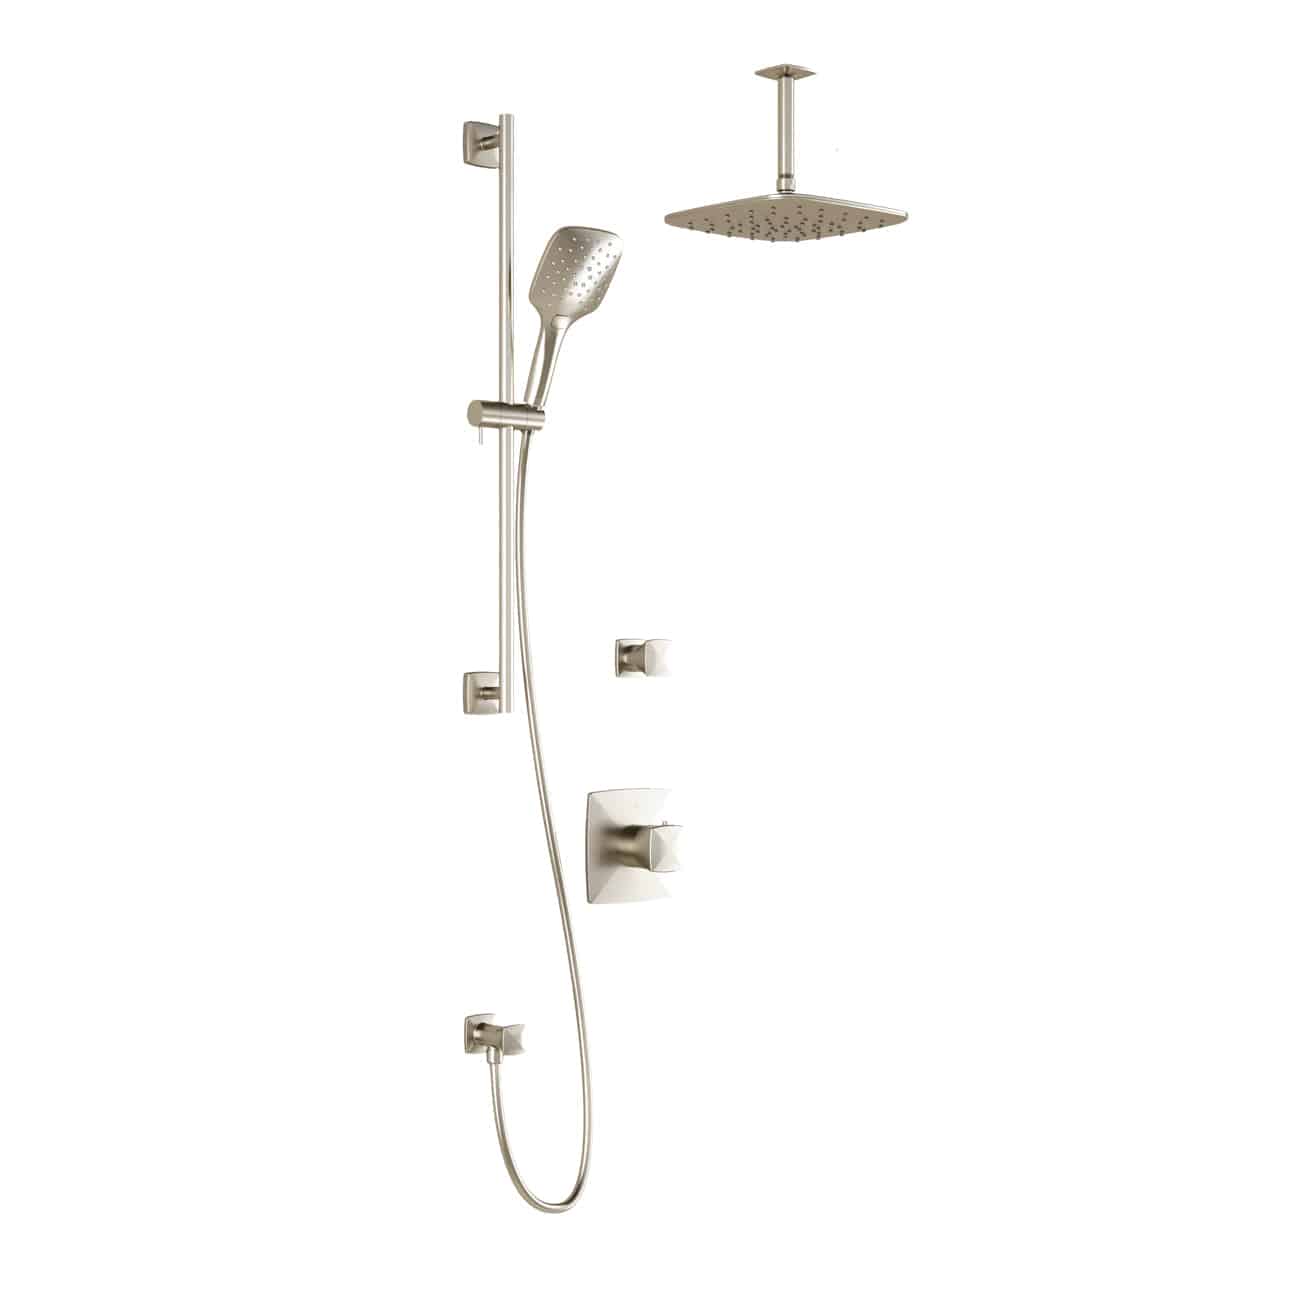 Kalia UMANI T2 PLUS (Valves Not Included) AQUATONIK T/P Shower Kit System with Vertical Ceiling Arm and 9" Square Rain Shower Head- Brushed Nickel PVD